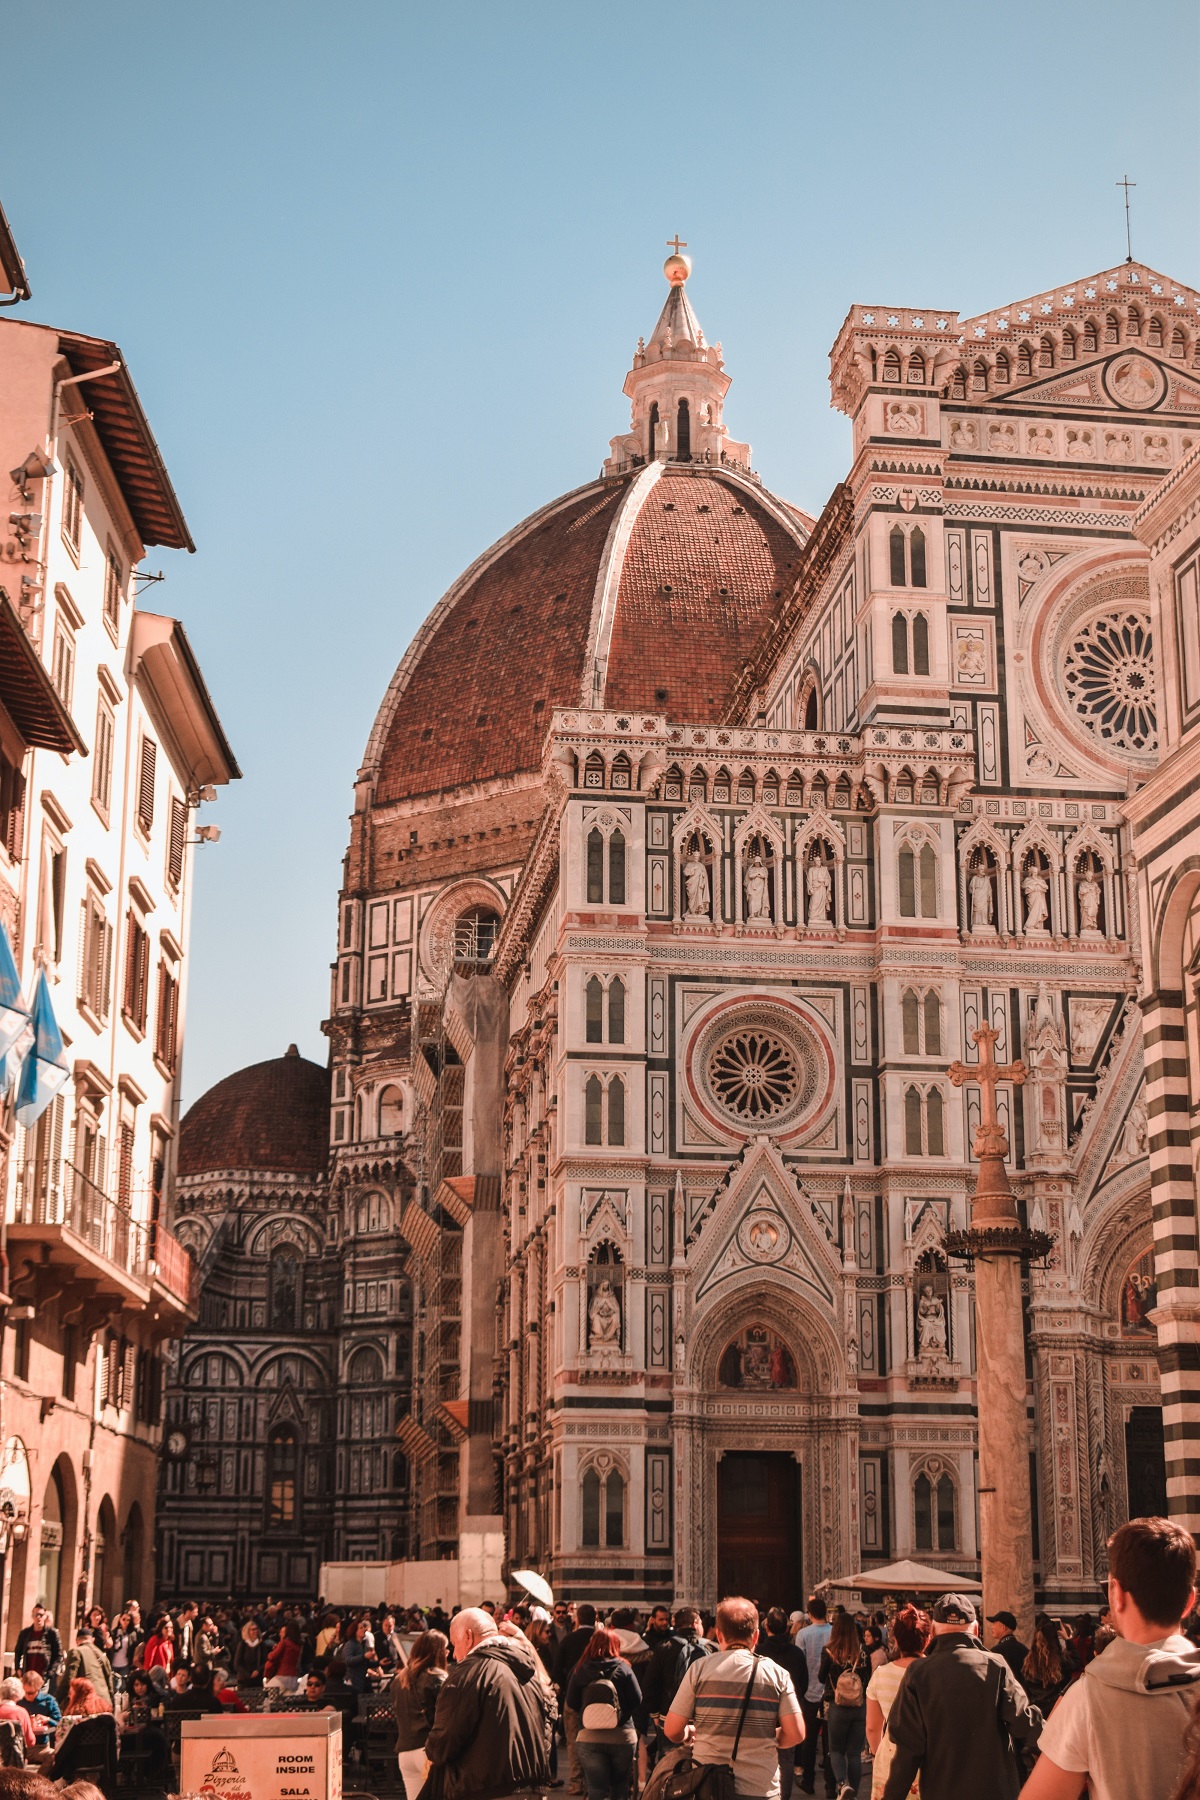 Crowds of tourists surround the Duomo in Florence on a sunny summer day